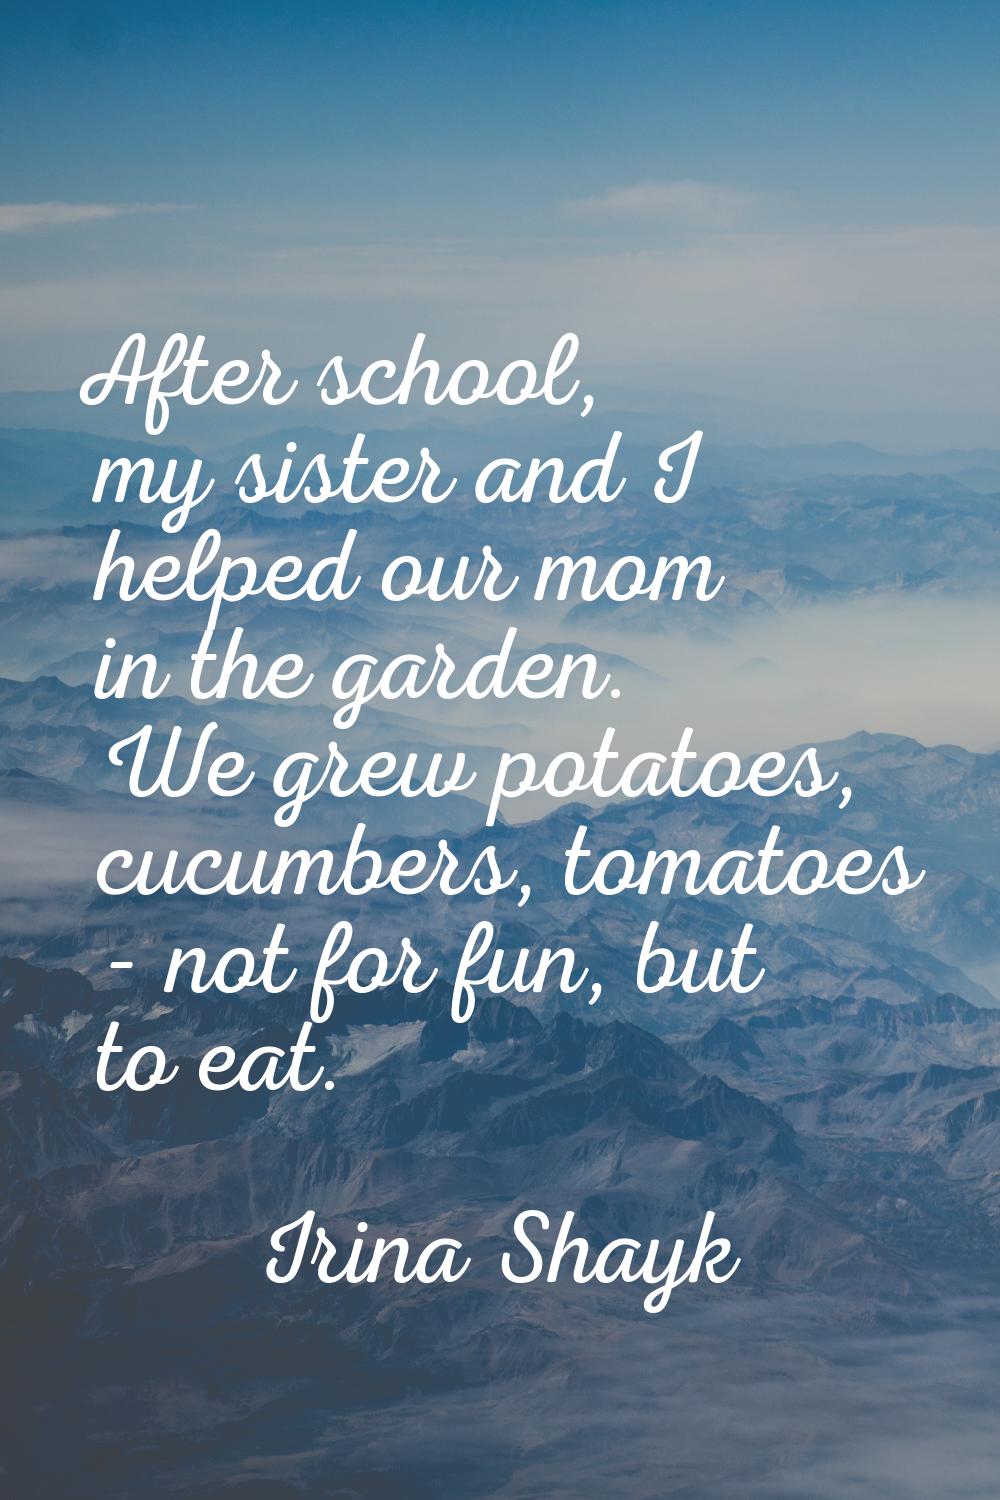 After school, my sister and I helped our mom in the garden. We grew potatoes, cucumbers, tomatoes -